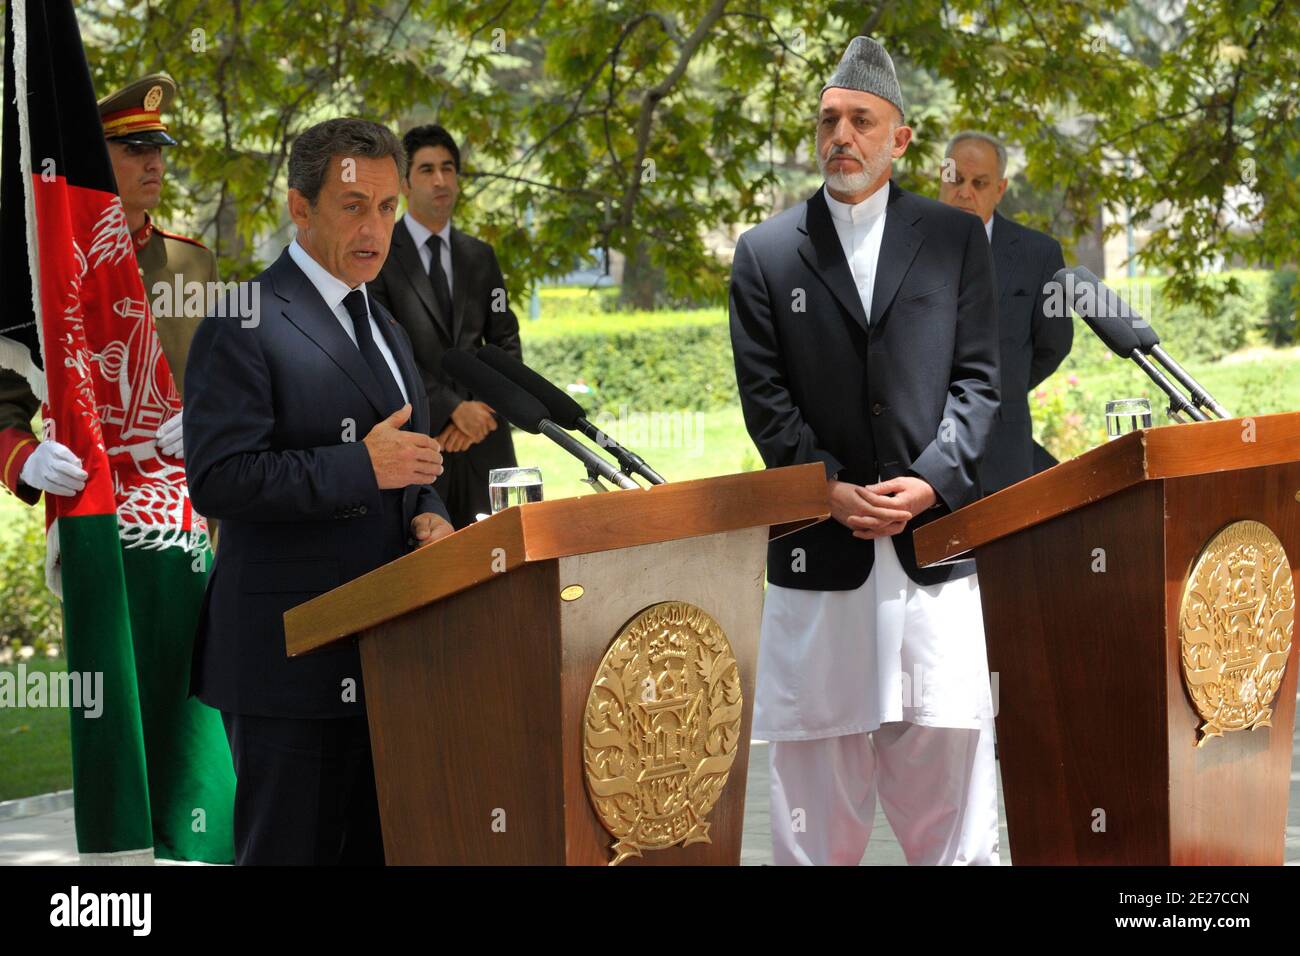 Afghanistan's President Hamid Karzai (R) listens to his French counterpart Nicolas Sarkozy during a news conference after Karzai's brother was shot killed in Kandahar province, at the presidential palace in Kabul July 12, 2011. Ahmad Wali Karzai, a brother of Afghan President Hamid Karzai, and one of the most powerful men in southern Afghanistan, was shot dead on Tuesday, apparently by one of his bodyguards. Photo by Philippe Wojazer/Pool/ABACAPRESS.COM Stock Photo